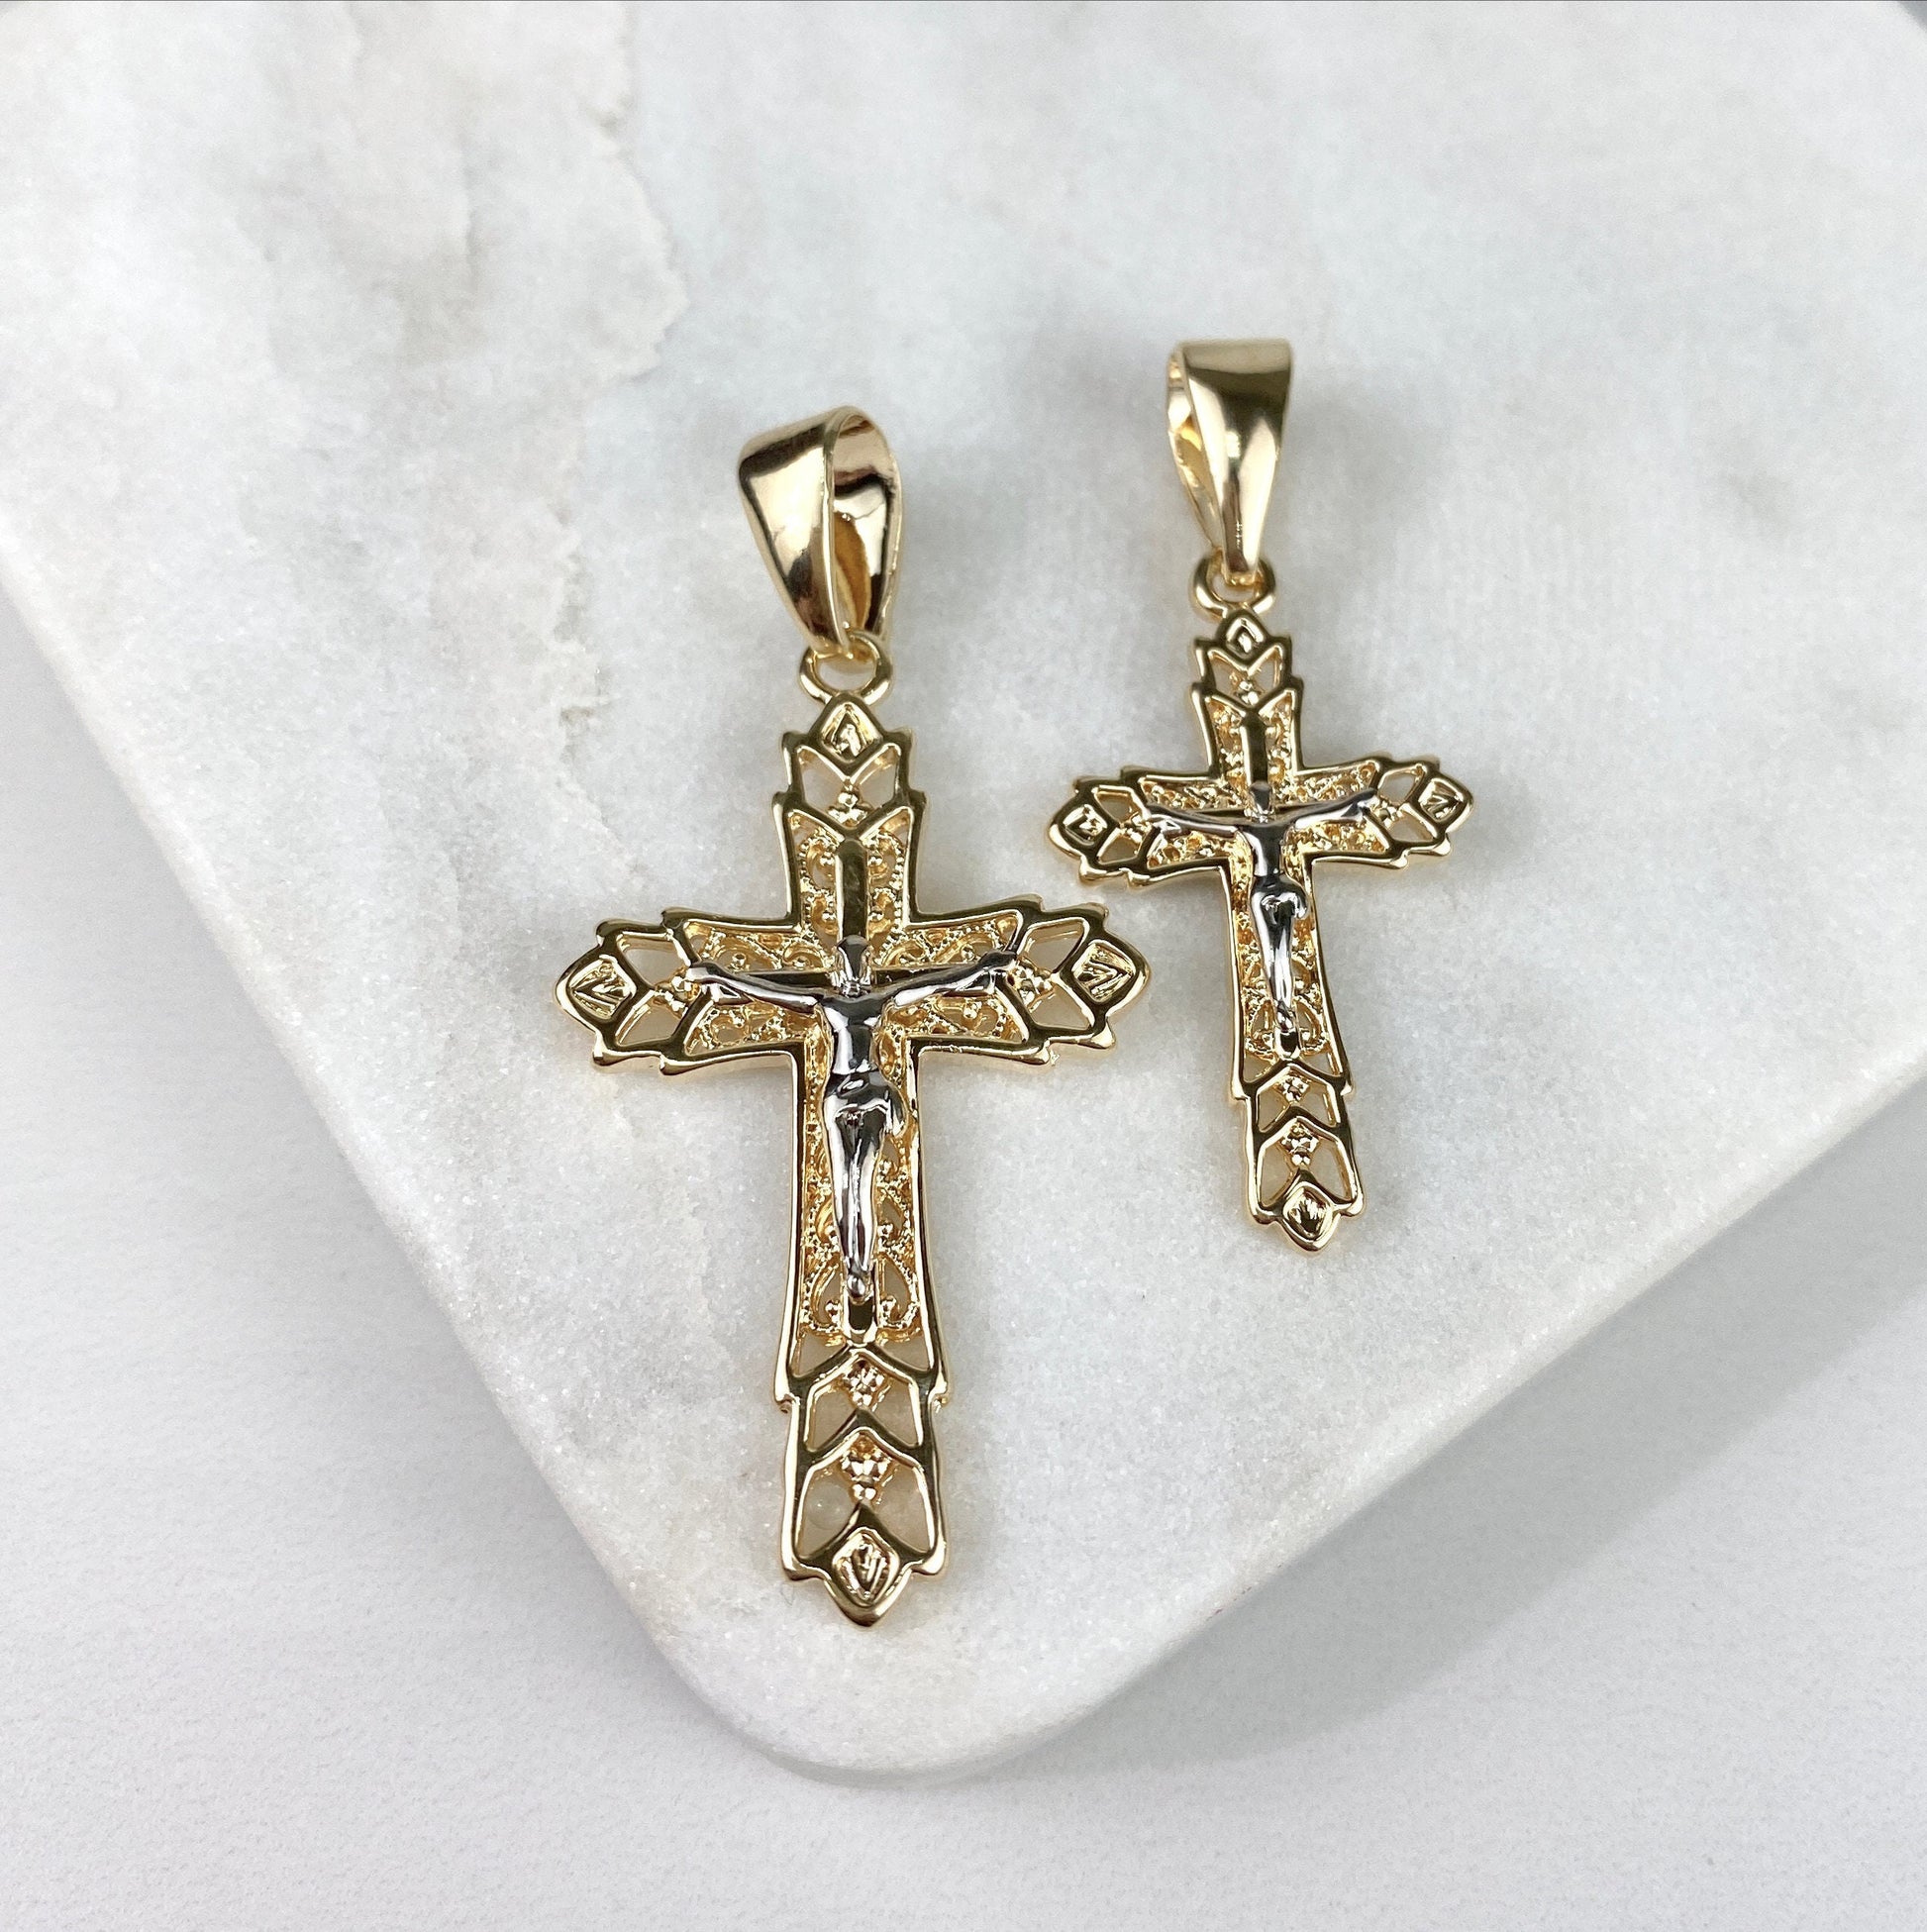 18k Gold Filled Cross Jesus, Crucifix Charms Pendant, Two Tone Gold & Silver, 1.6 Inches or 2 Inches, Wholesale Jewelry Making Supplies